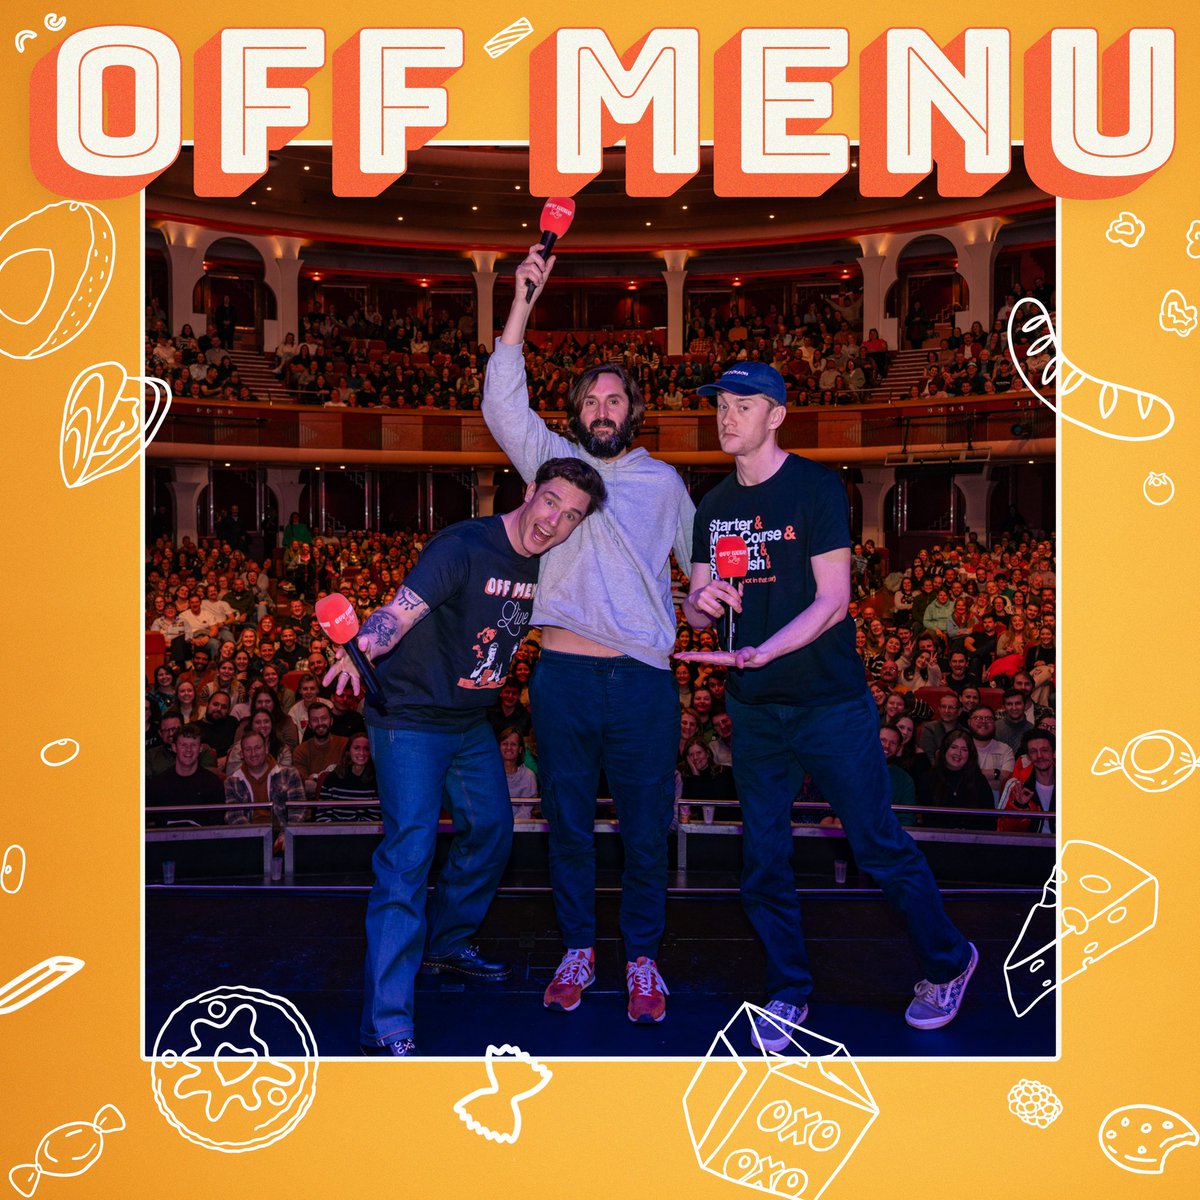 New episode of... 🧞‍♂️🍽 Off Menu 🍽🧞‍♂️ with Ed Gamble and James Acaster and special guest... Joe Wilkinson! Live in Brighton 🍽️ Apple: apple.co/4d3cQY5 🍽️ Spotify: open.spotify.com/episode/3vMjby…